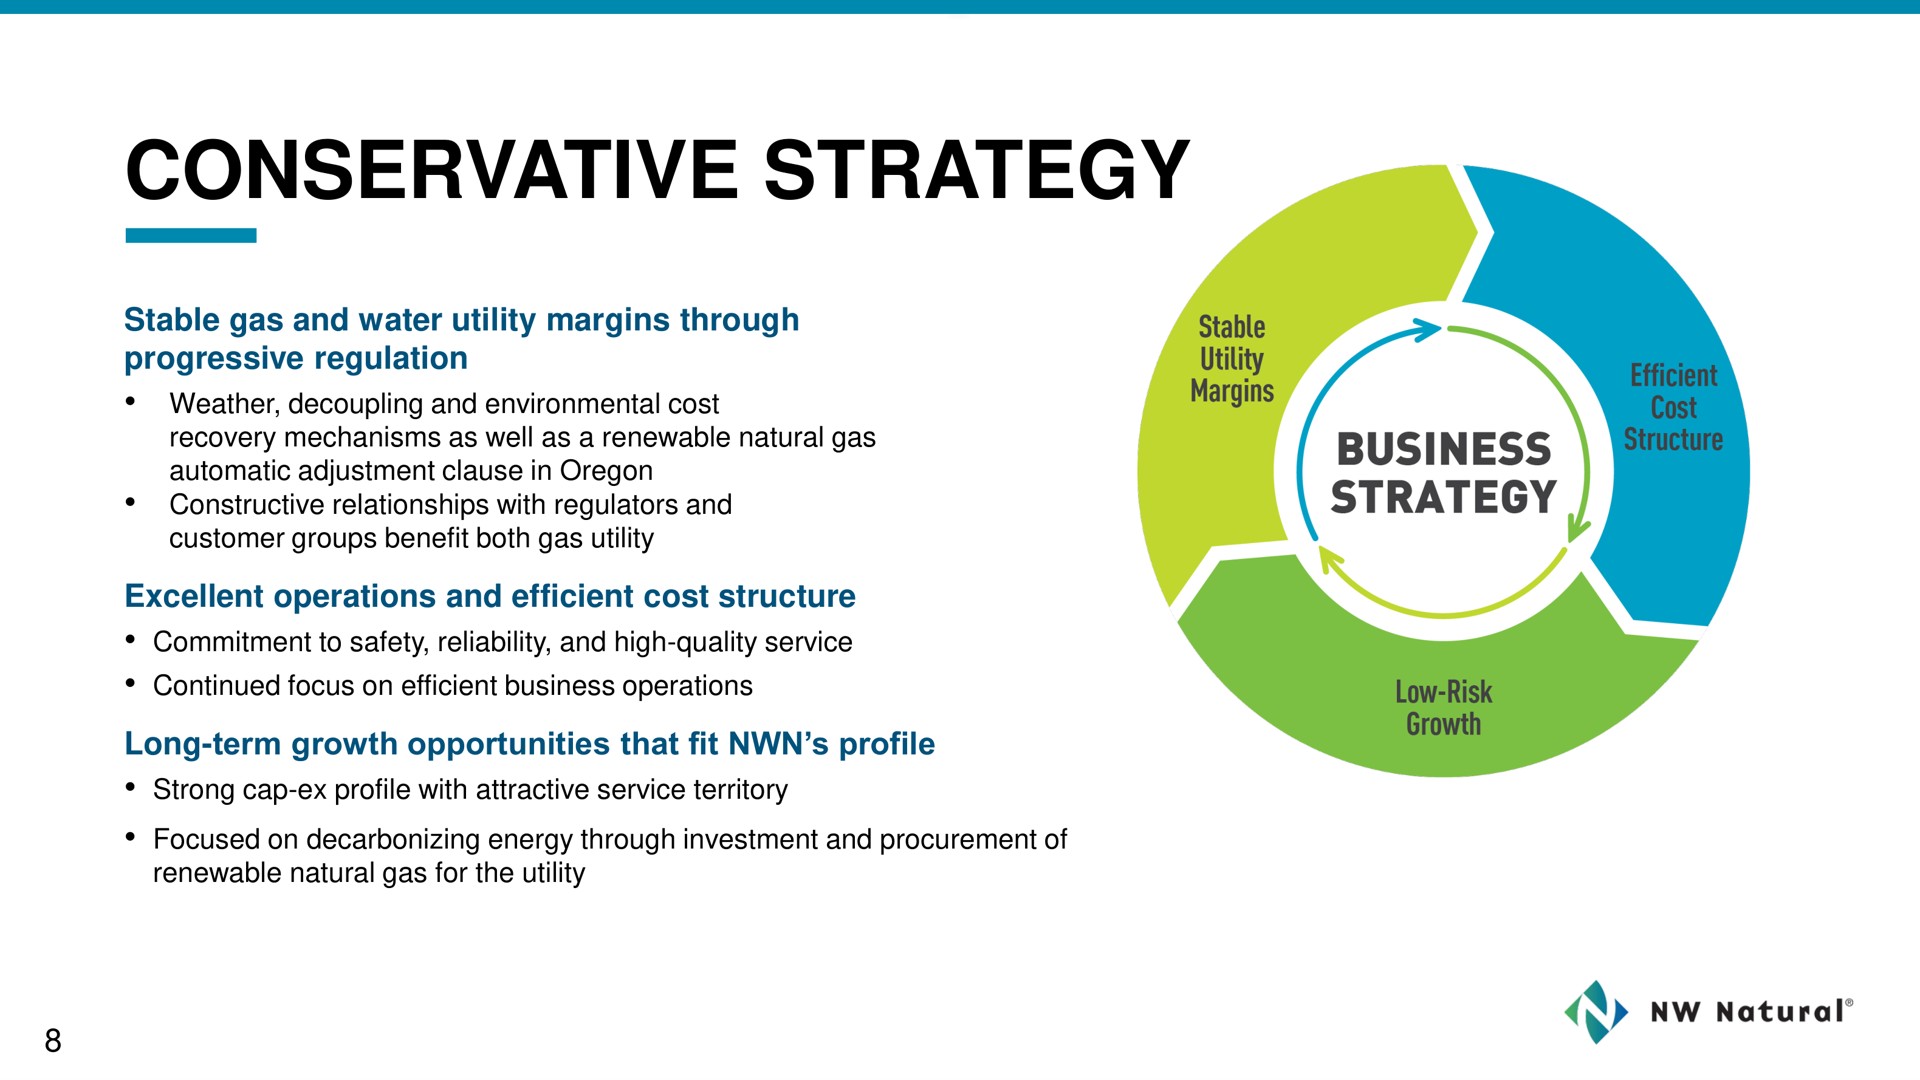 conservative strategy | NW Natural Holdings